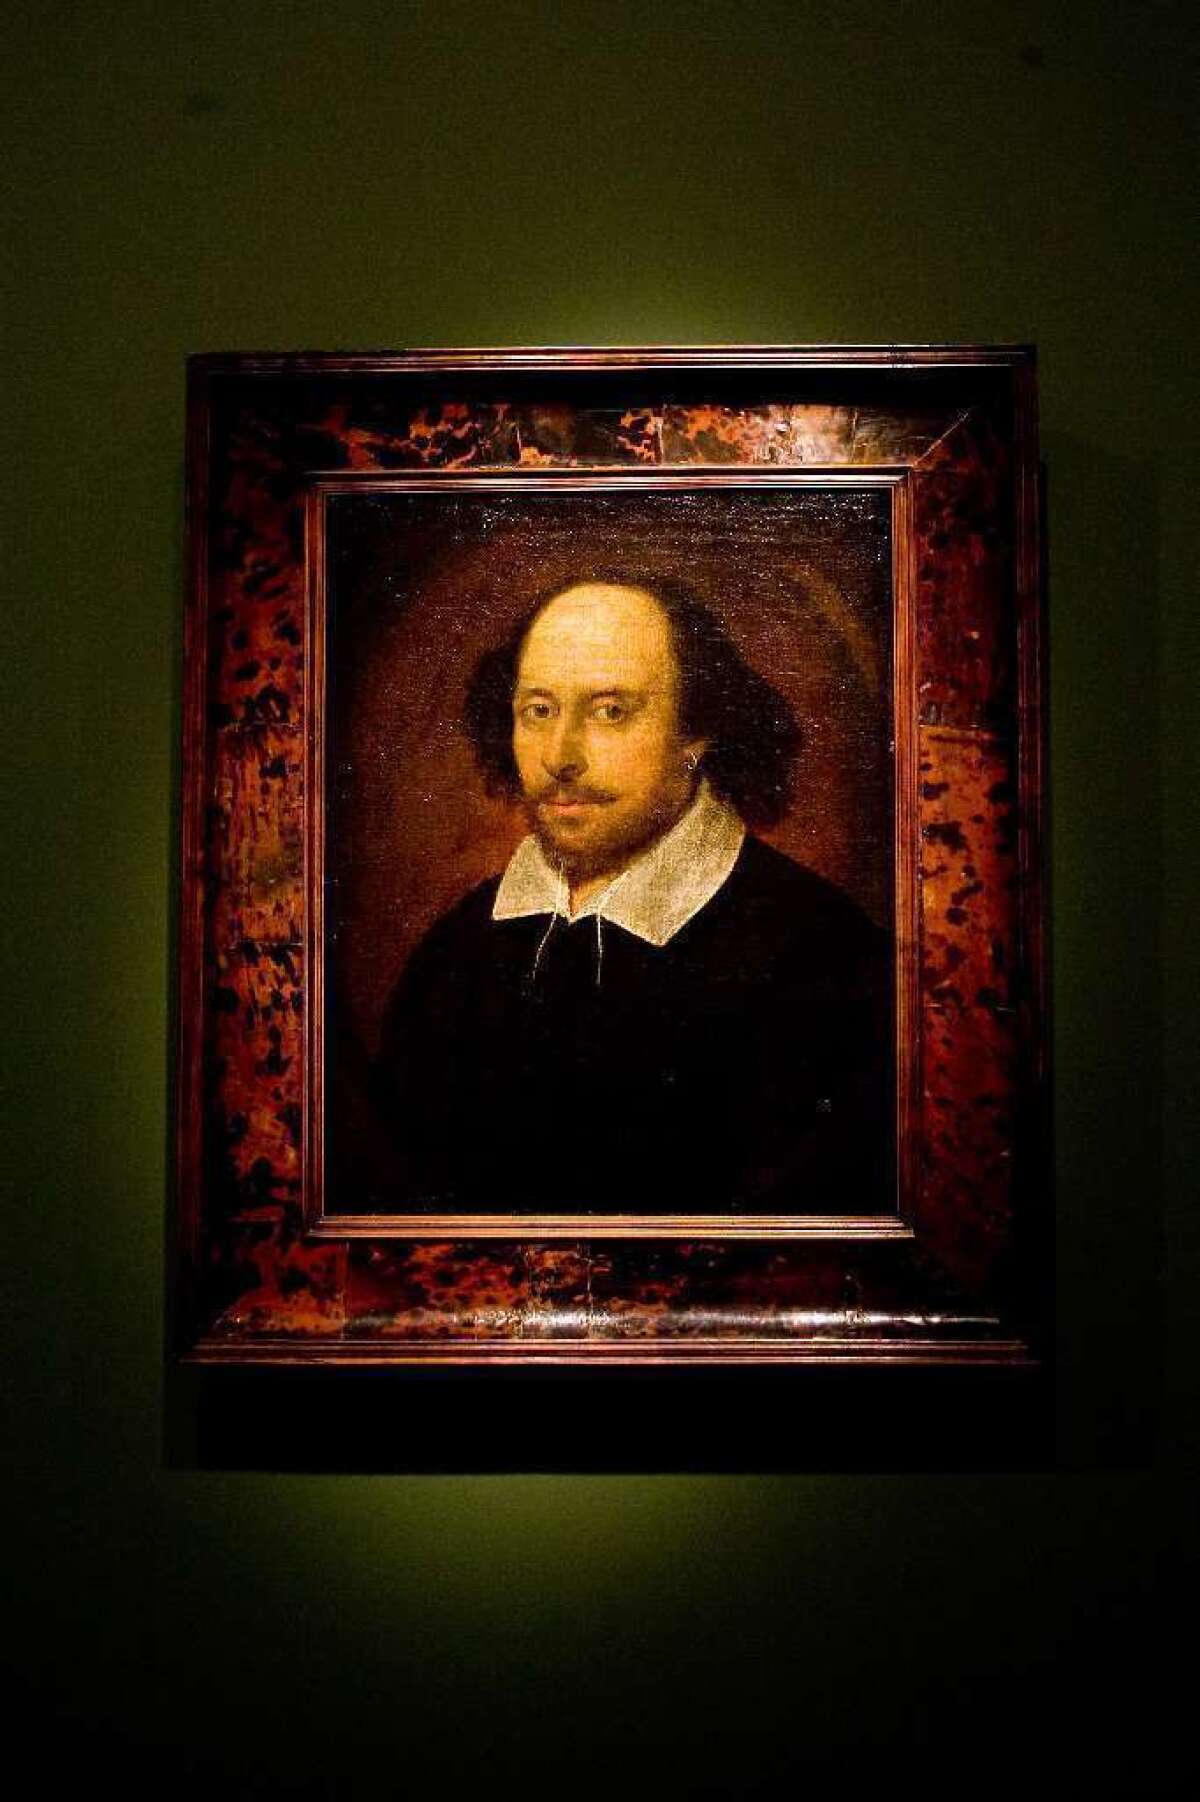 William Shakespeare, seen in this portrait believed to have been painted by John Taylor between 1600 and 1610, will be the focus of a new PBS series in which celebrity hosts take in-depth looks into several of his plays.